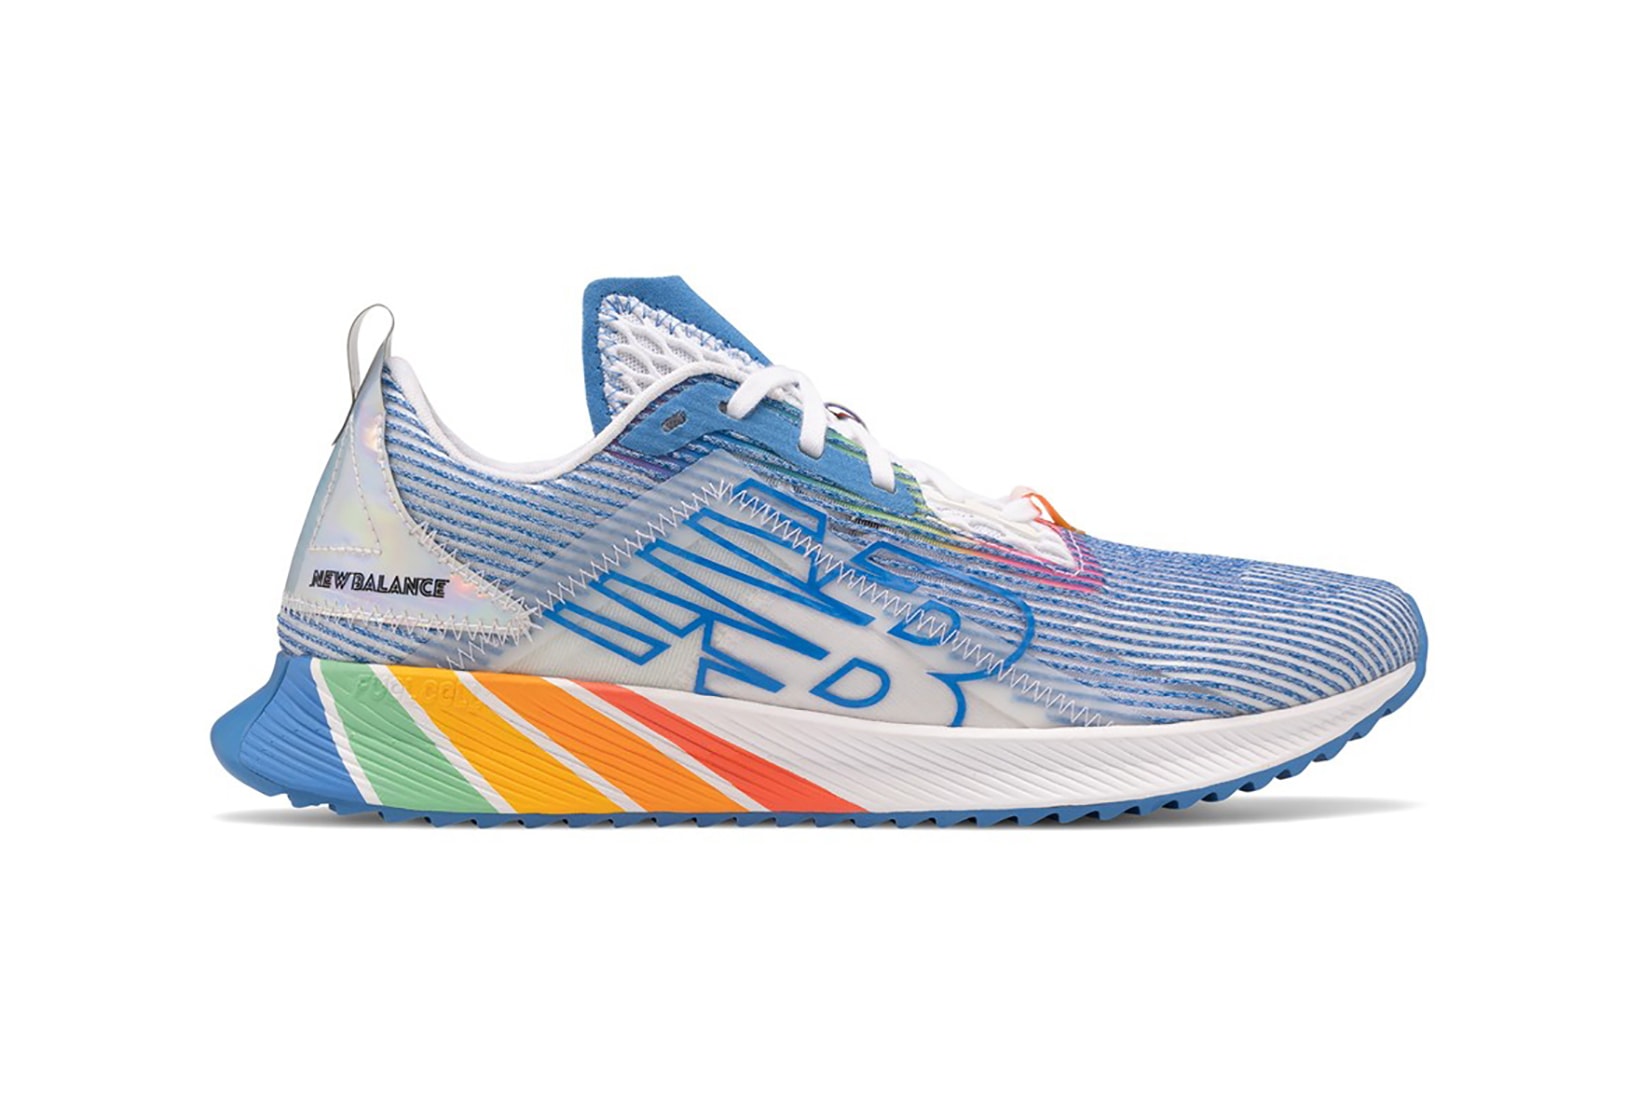 new balance pride lgbtq pack collection 327 fuelcell echo sneakers rainbow colorway white blue red purple orange green shoes footwear sneakerhead